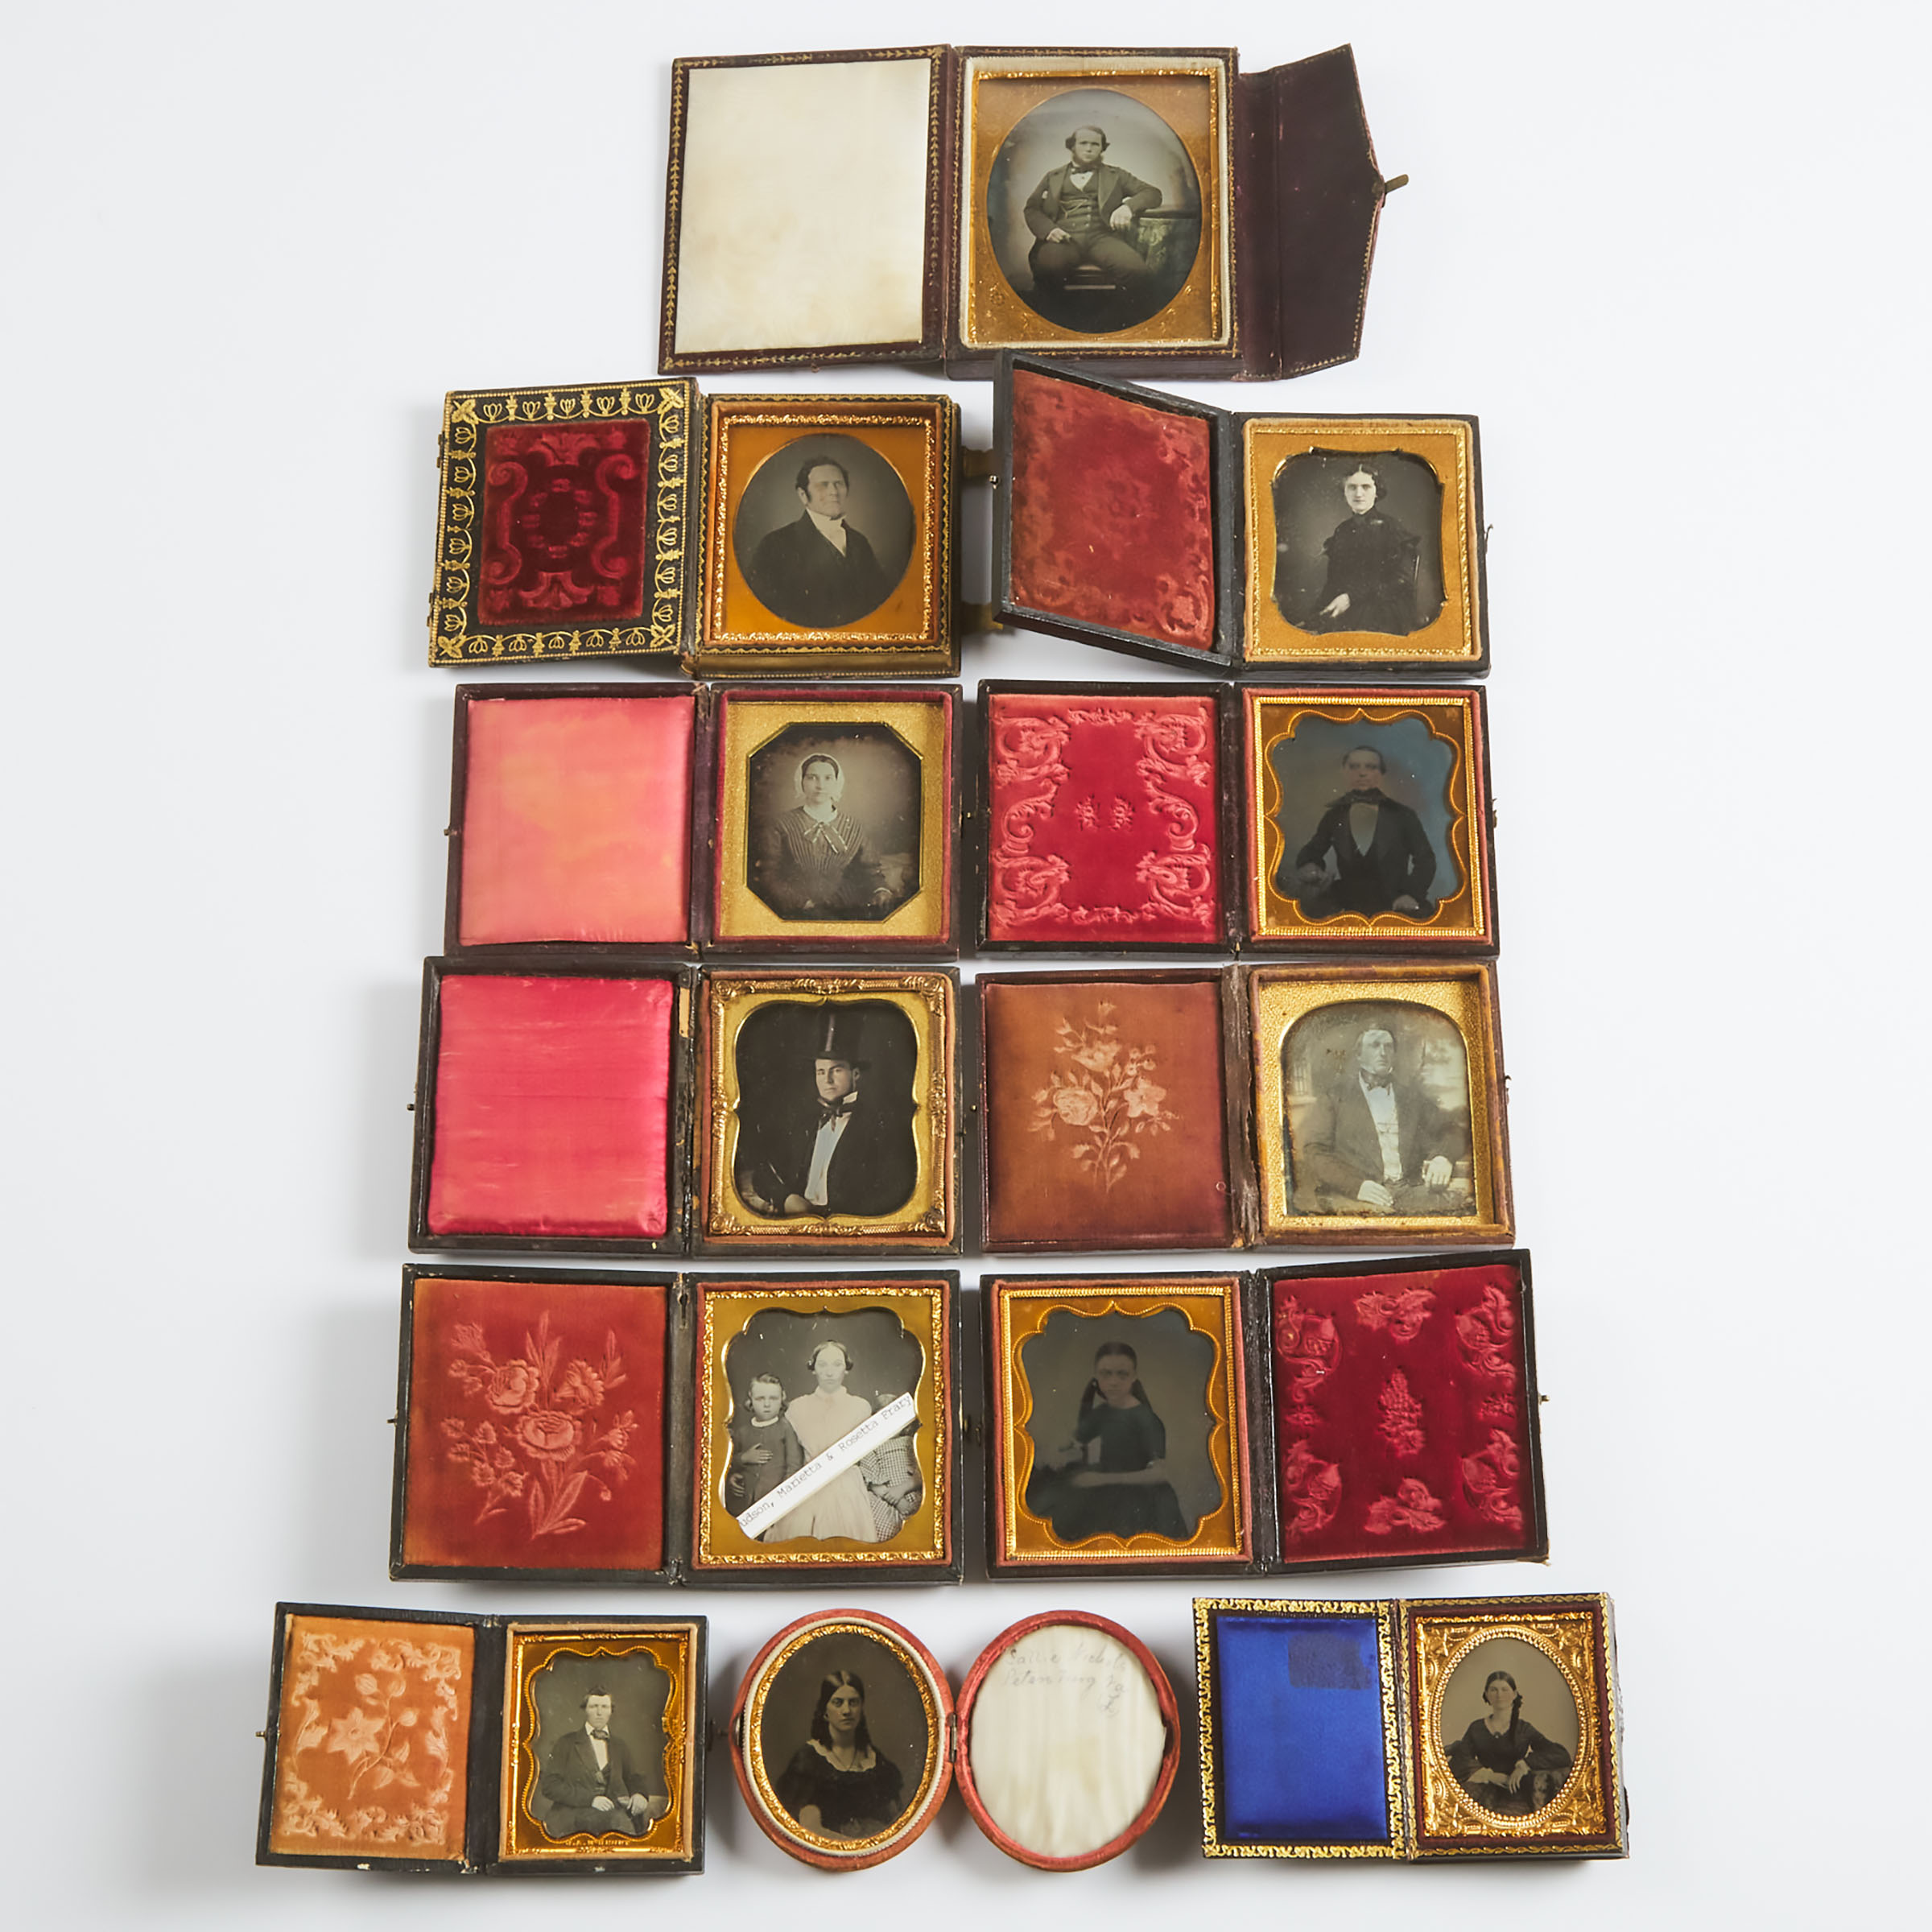 Group of 12 Cased Abrotype and Daguerreotype Portraits, 19th century